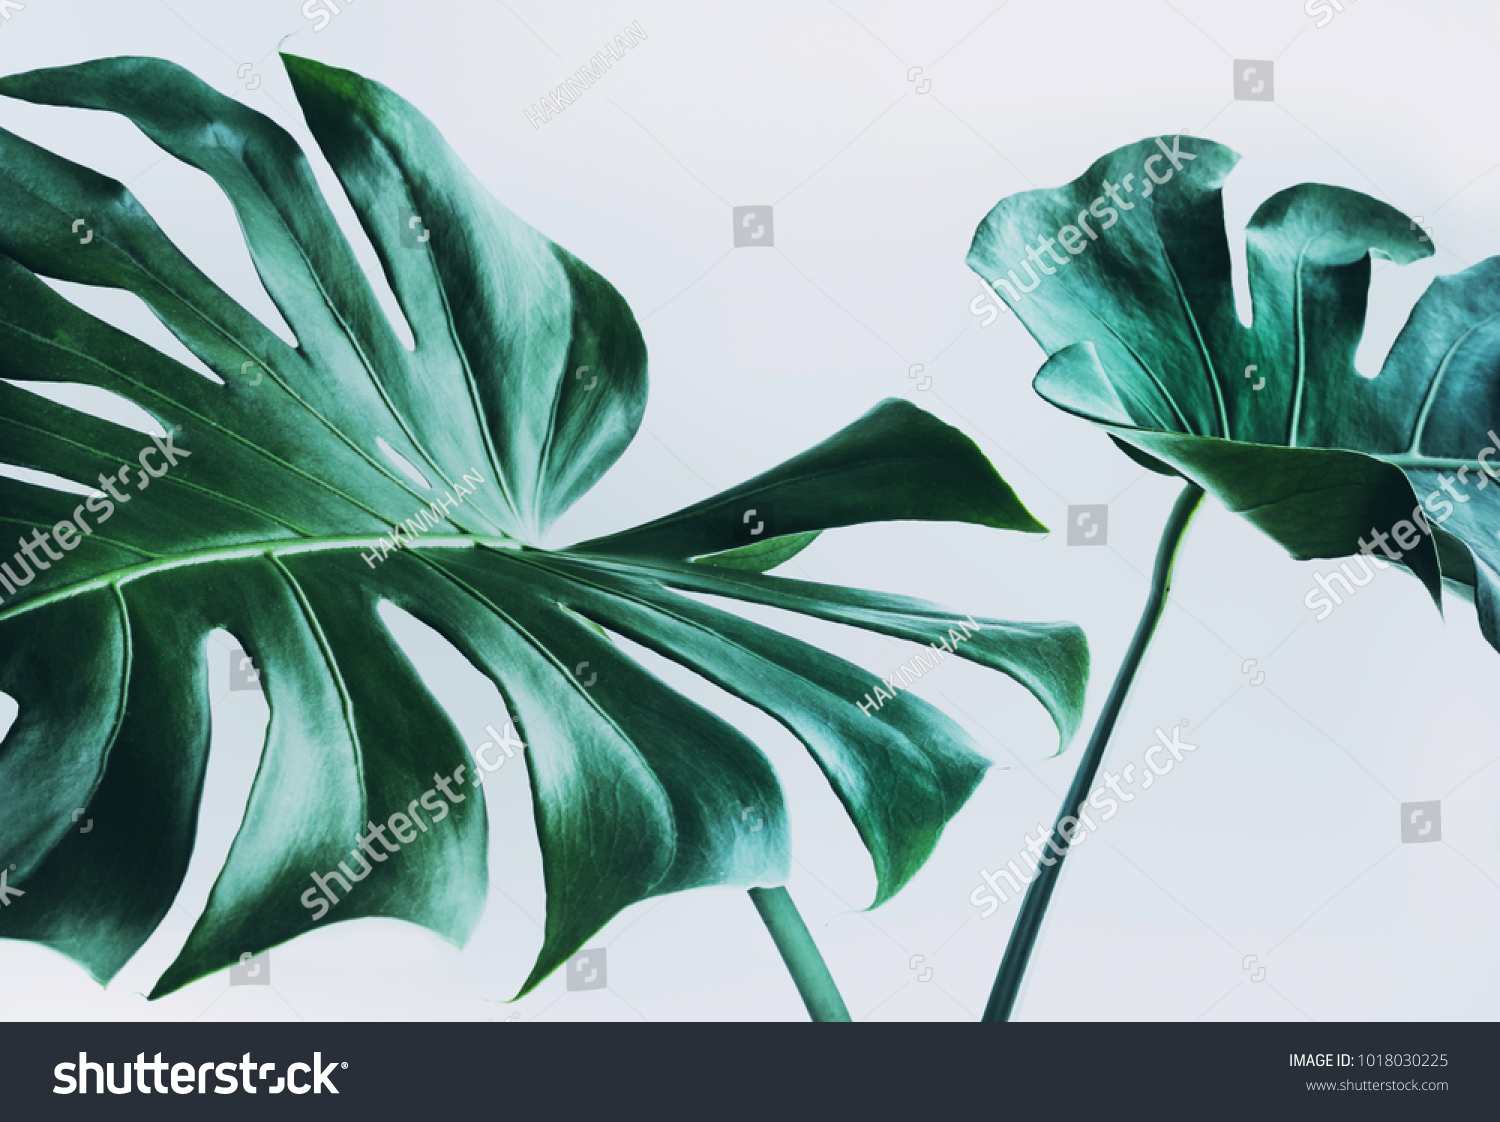 Real monstera leaves decorating for composition design.Tropical,botanical nature concepts ideas. #1018030225